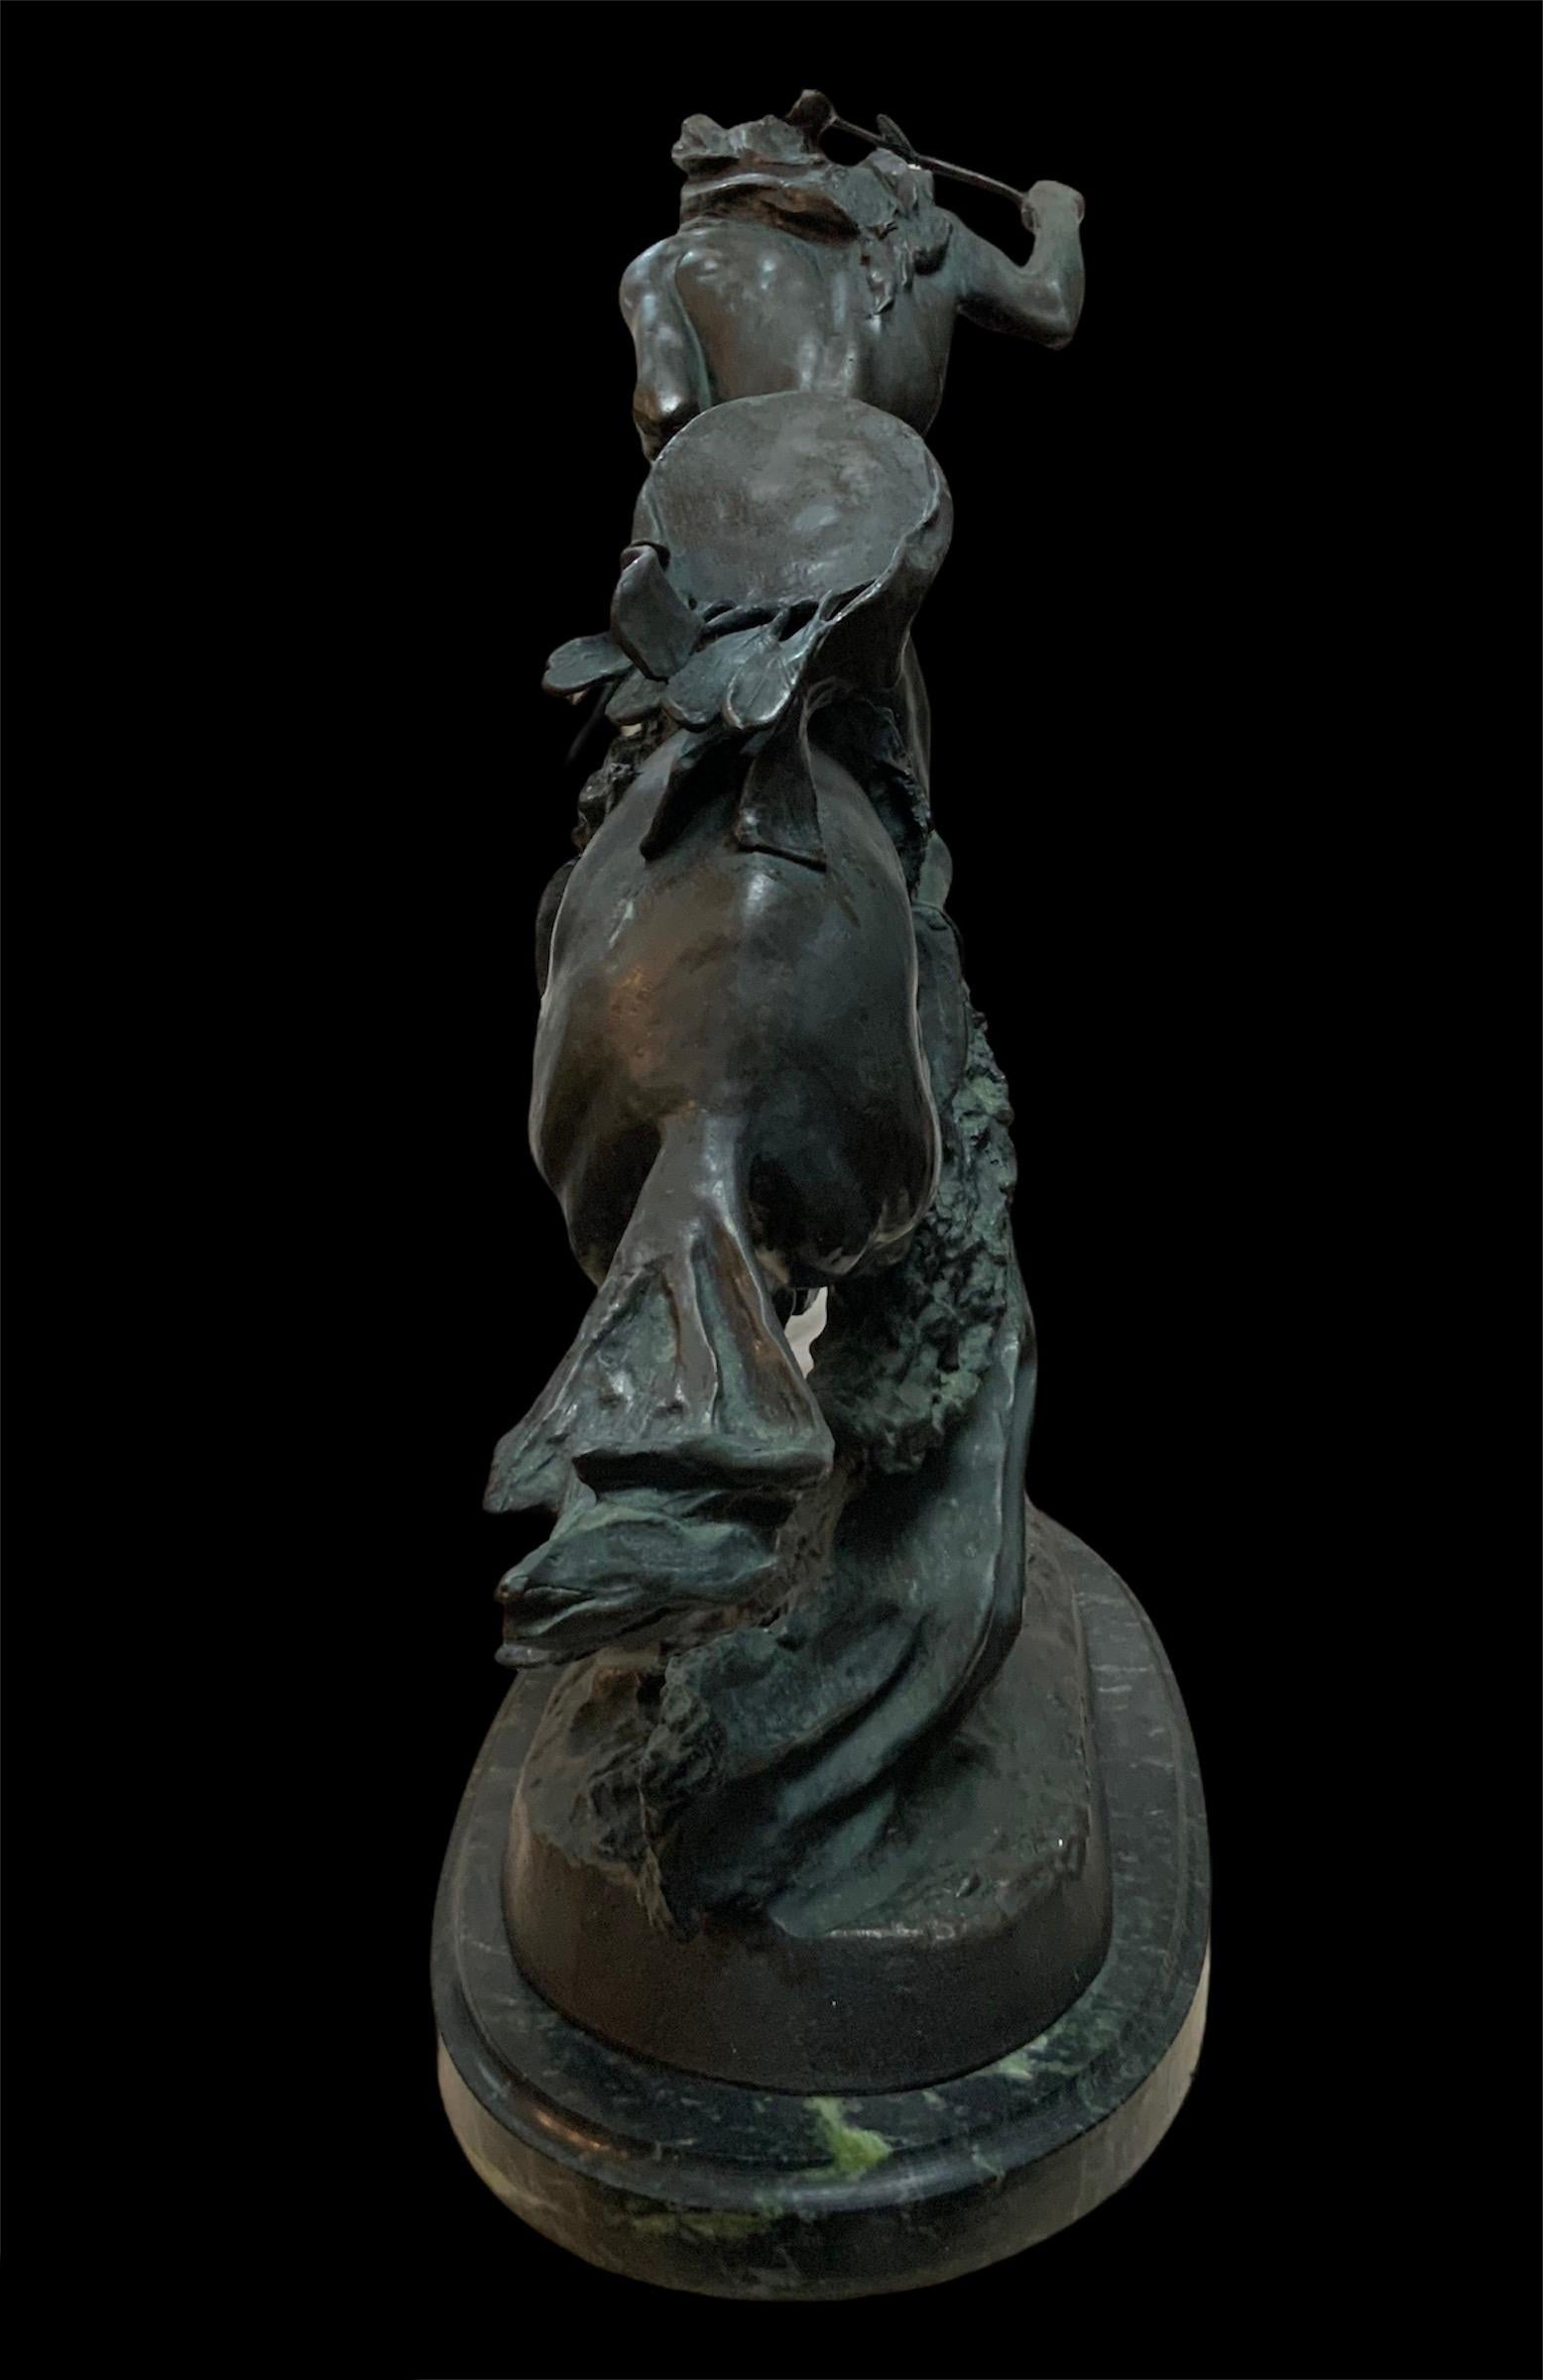 This is a patinated bronze sculpture of a Native American riding his horse over a buffalo robe saddle by Frederic Remington. It depicts a strong Native American wearing a loincloth and moccasins while his horse is breaking into a furious gallop. He